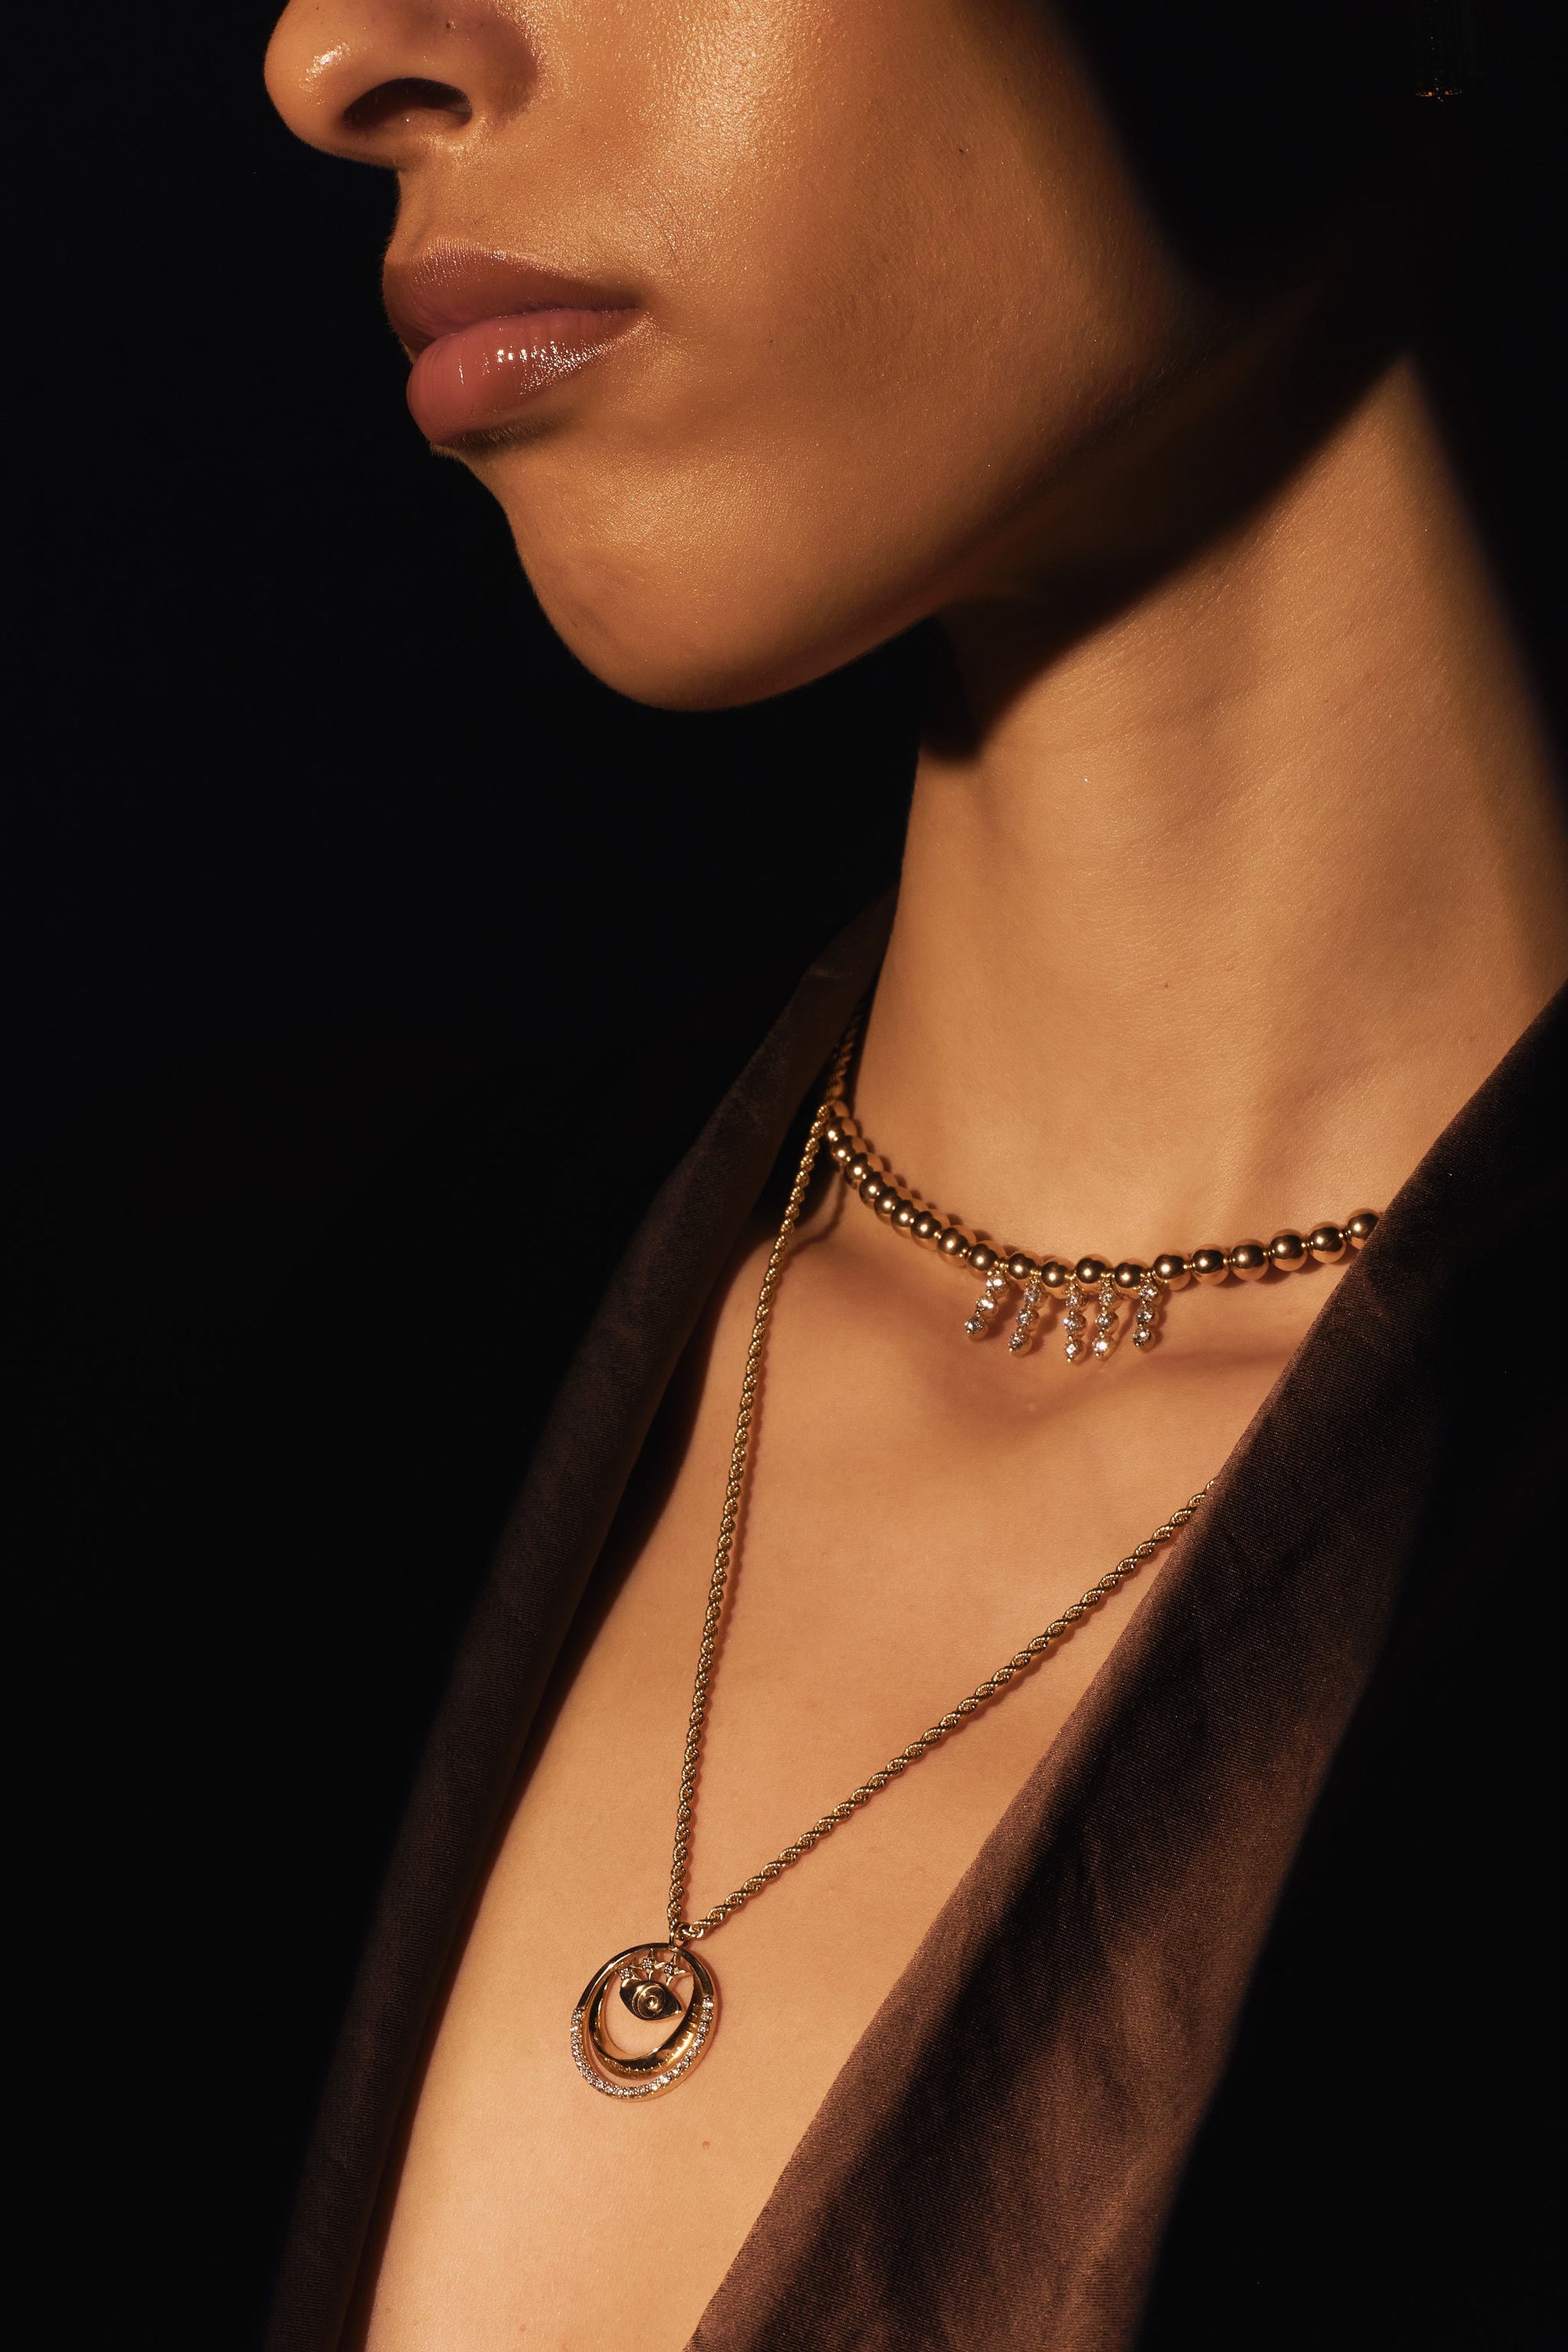 Close-up of a person's neck and lower face, highlighting two necklaces: one is the "Sticks and Gold Stones - Yellow Gold Beads and Diamond Necklace" from Nijma M Fine Jewelry, featuring vibrant gold beads with small dangling charms, while the other is a longer chain with a pendant showcasing two interlocking rings. The low lighting accentuates both the jewelry and the skin's texture.